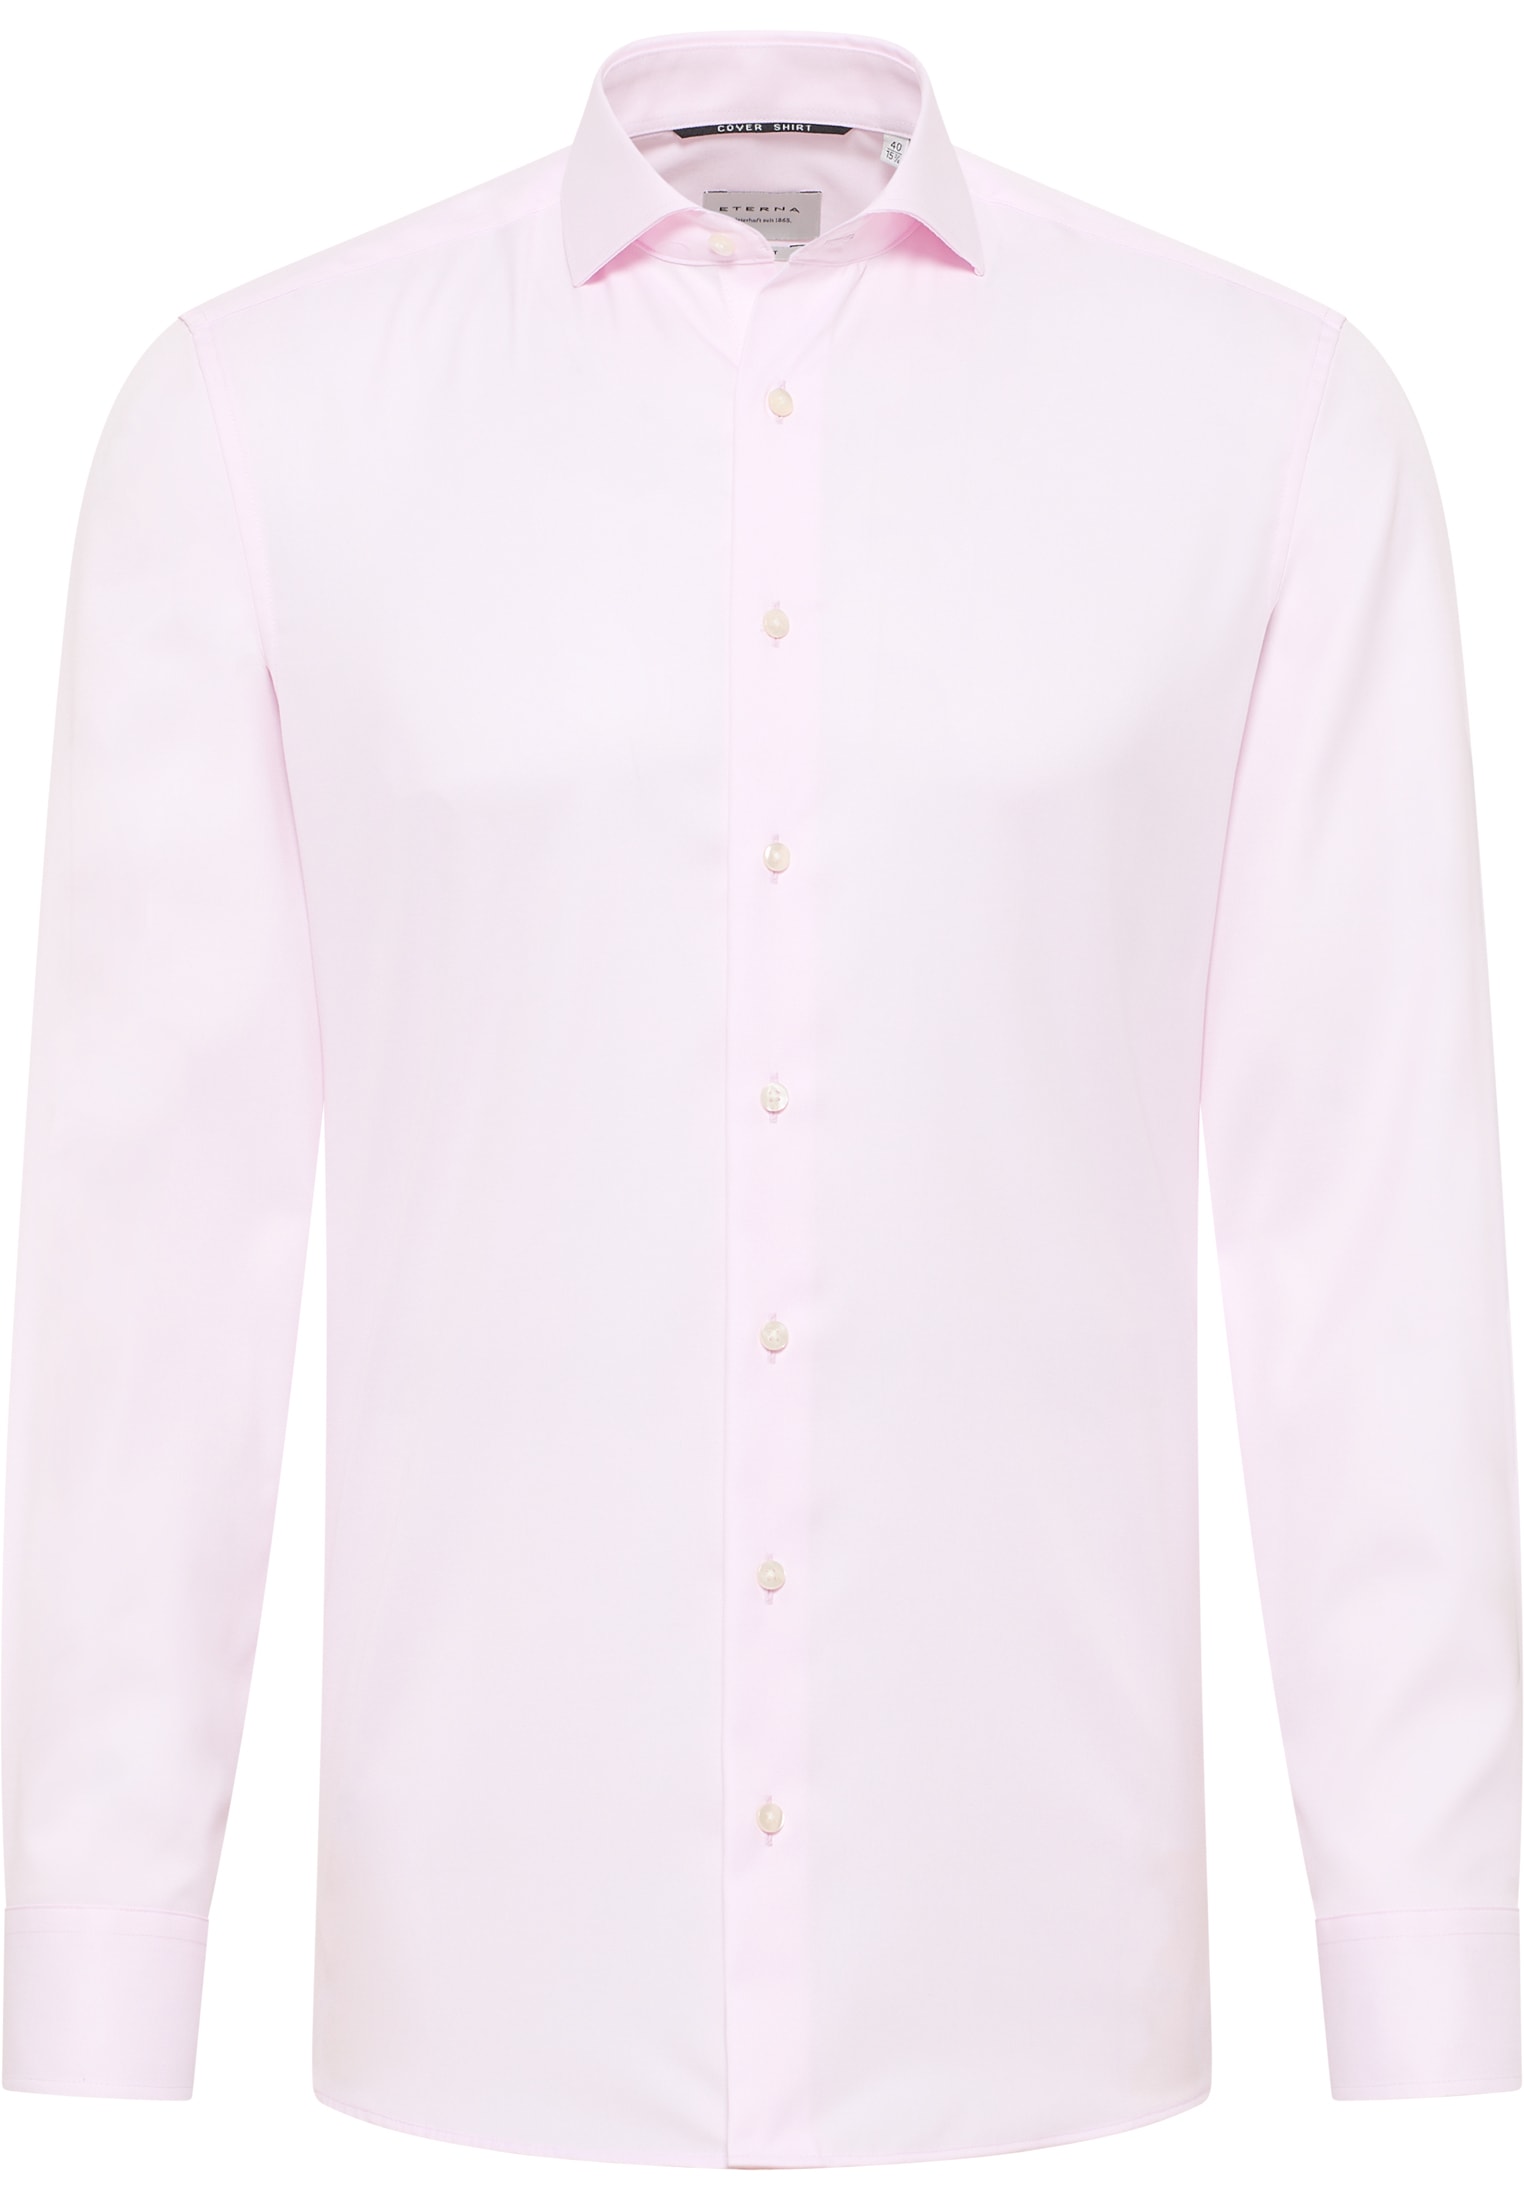 SLIM FIT Cover Shirt in roze vlakte